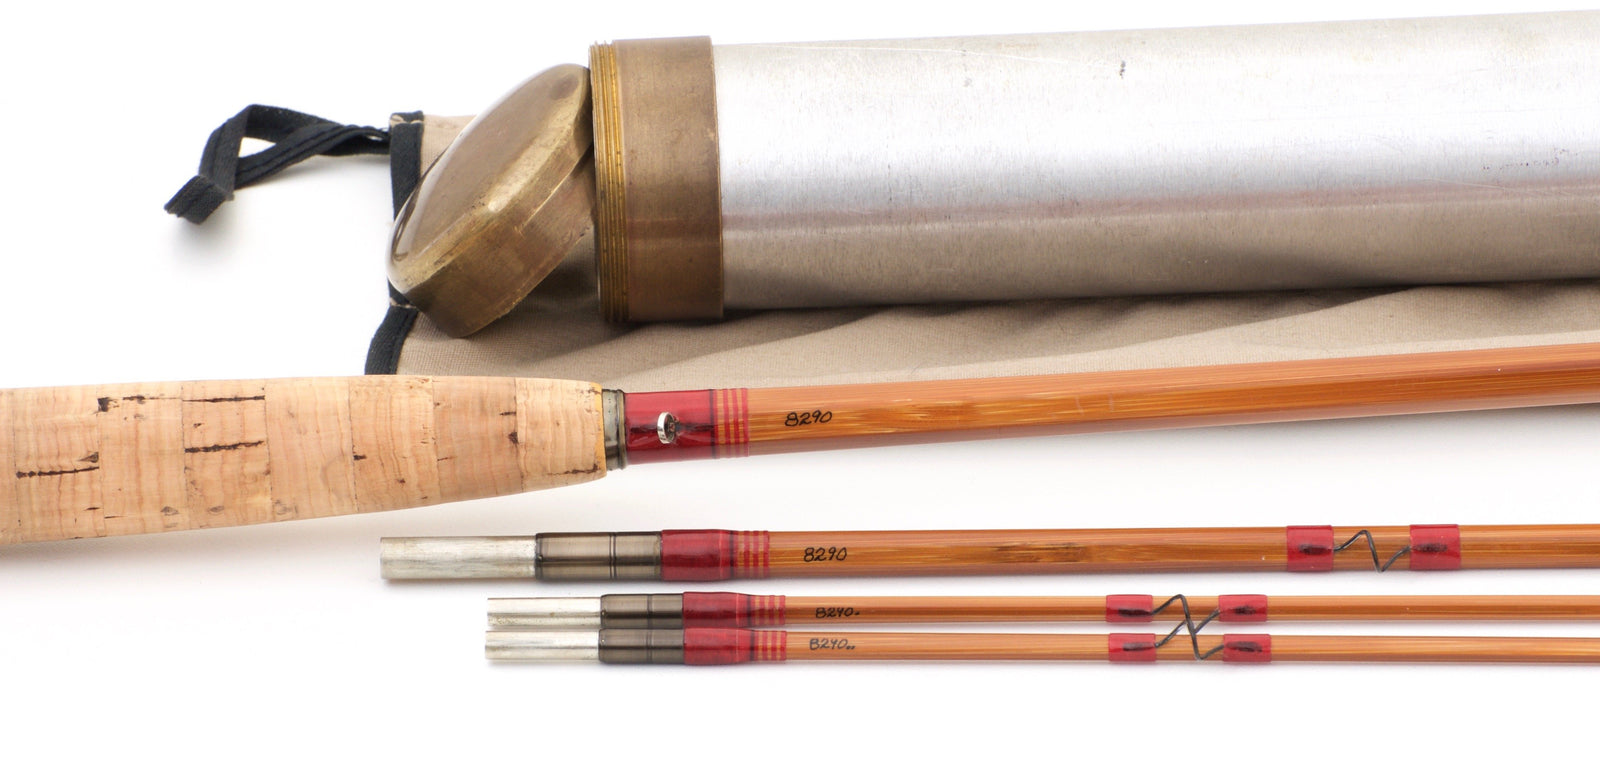 HL Leonard Bamboo Fly Rods For Sale Page 6 - Spinoza Rod Company